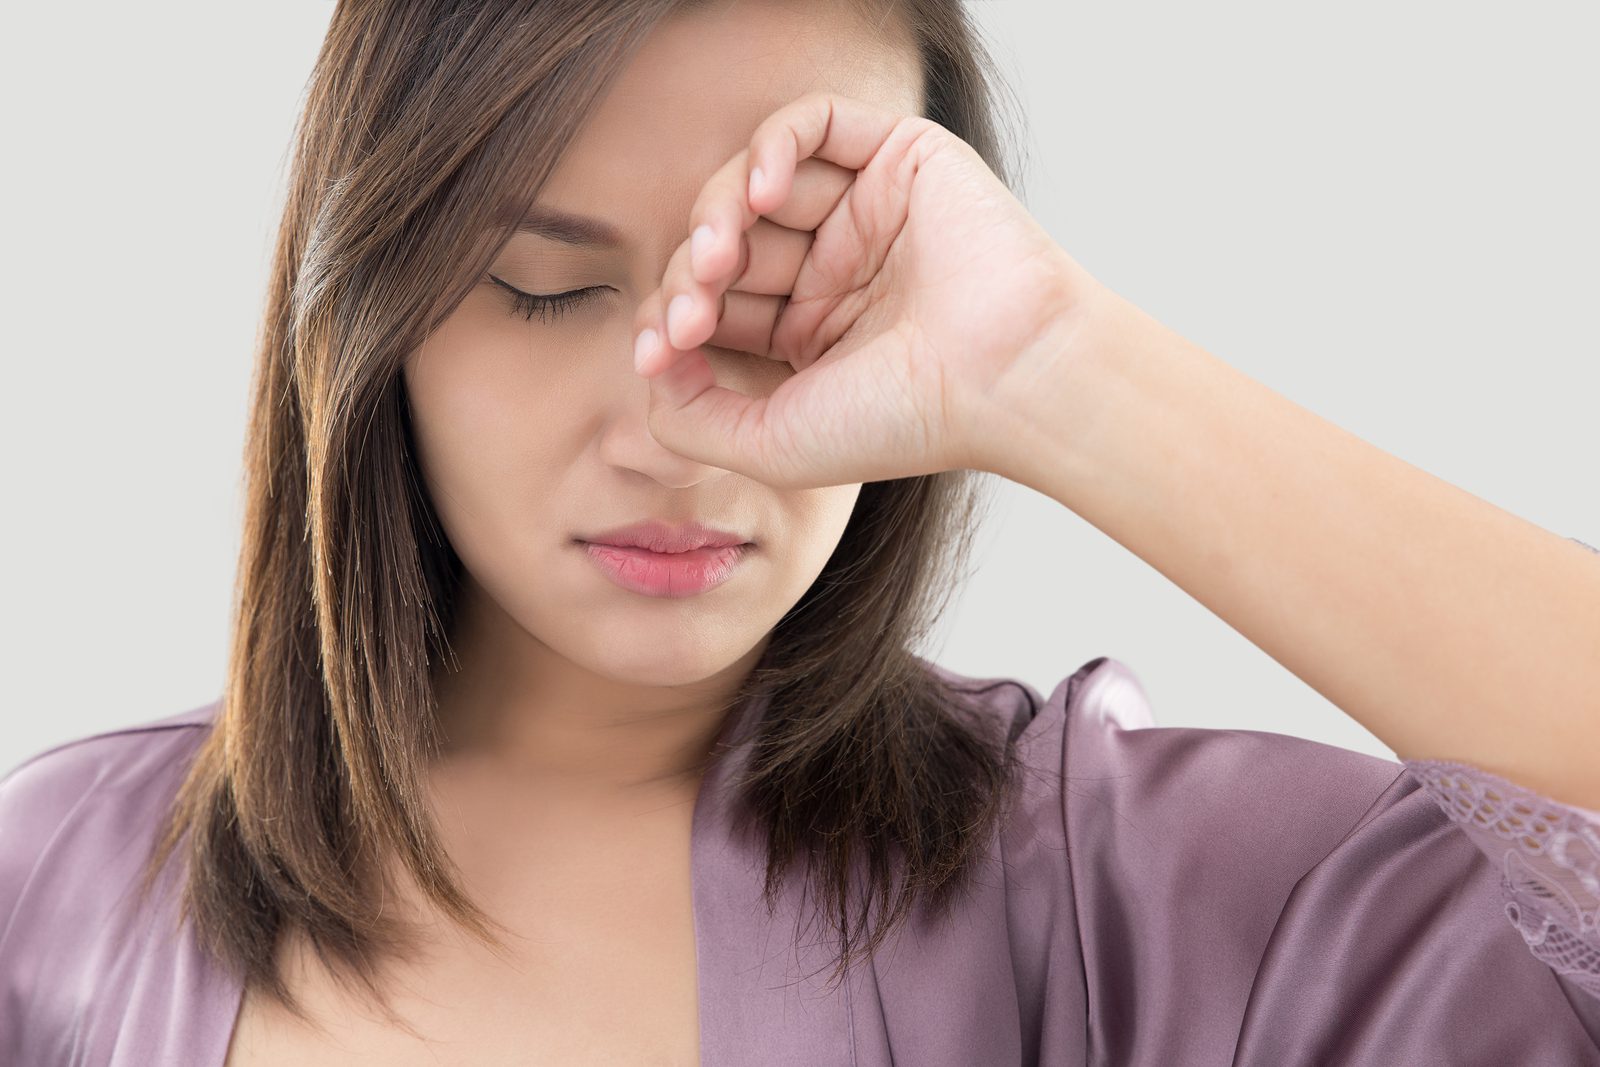 A photo of a woman rubbing her eye as if it's irritated